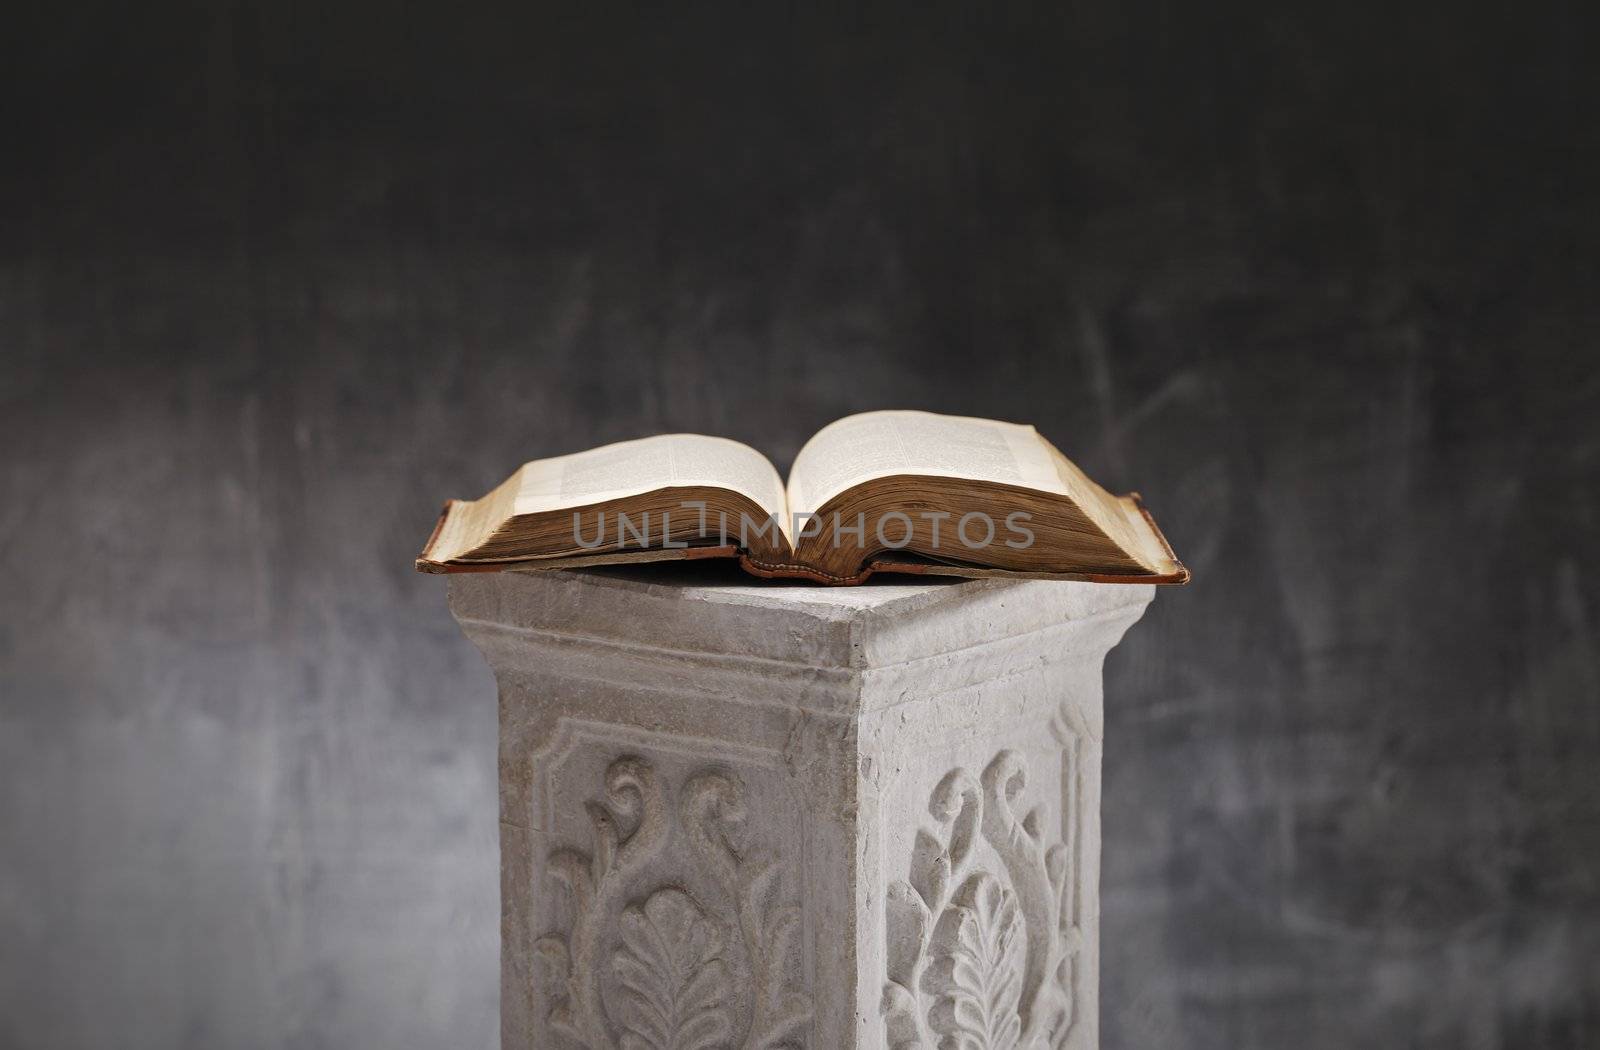 Old book opened on a plaster column.